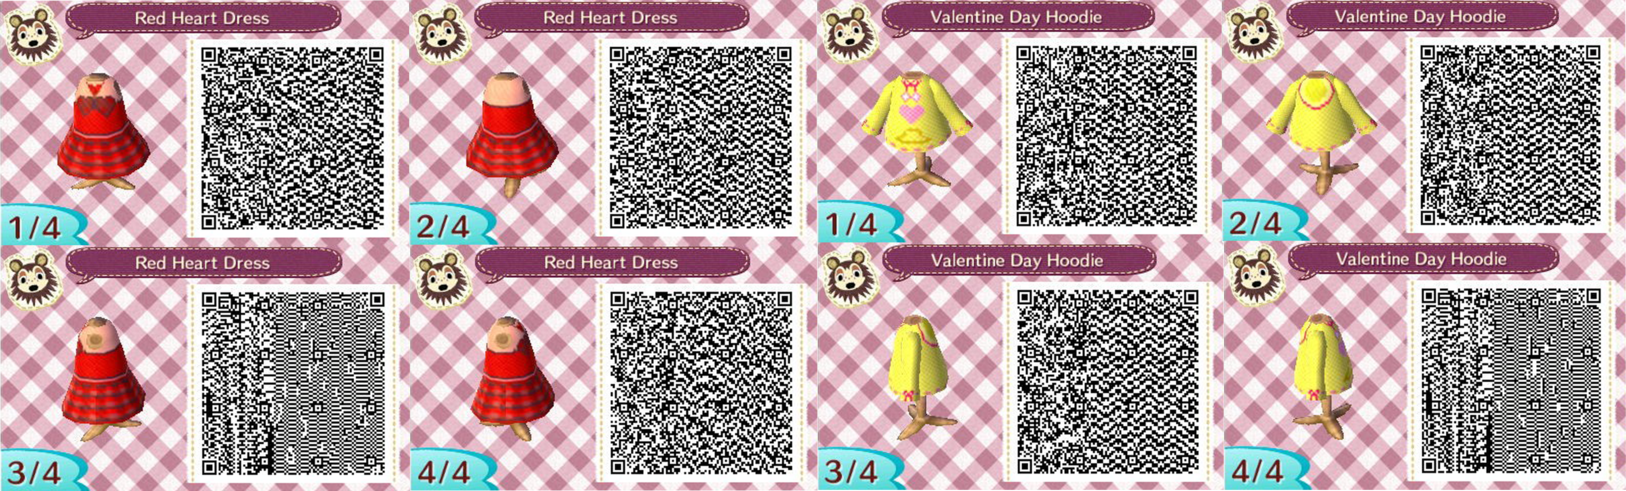 ACNL  Valentines Day Outfits by ACNL QR CODEZ on